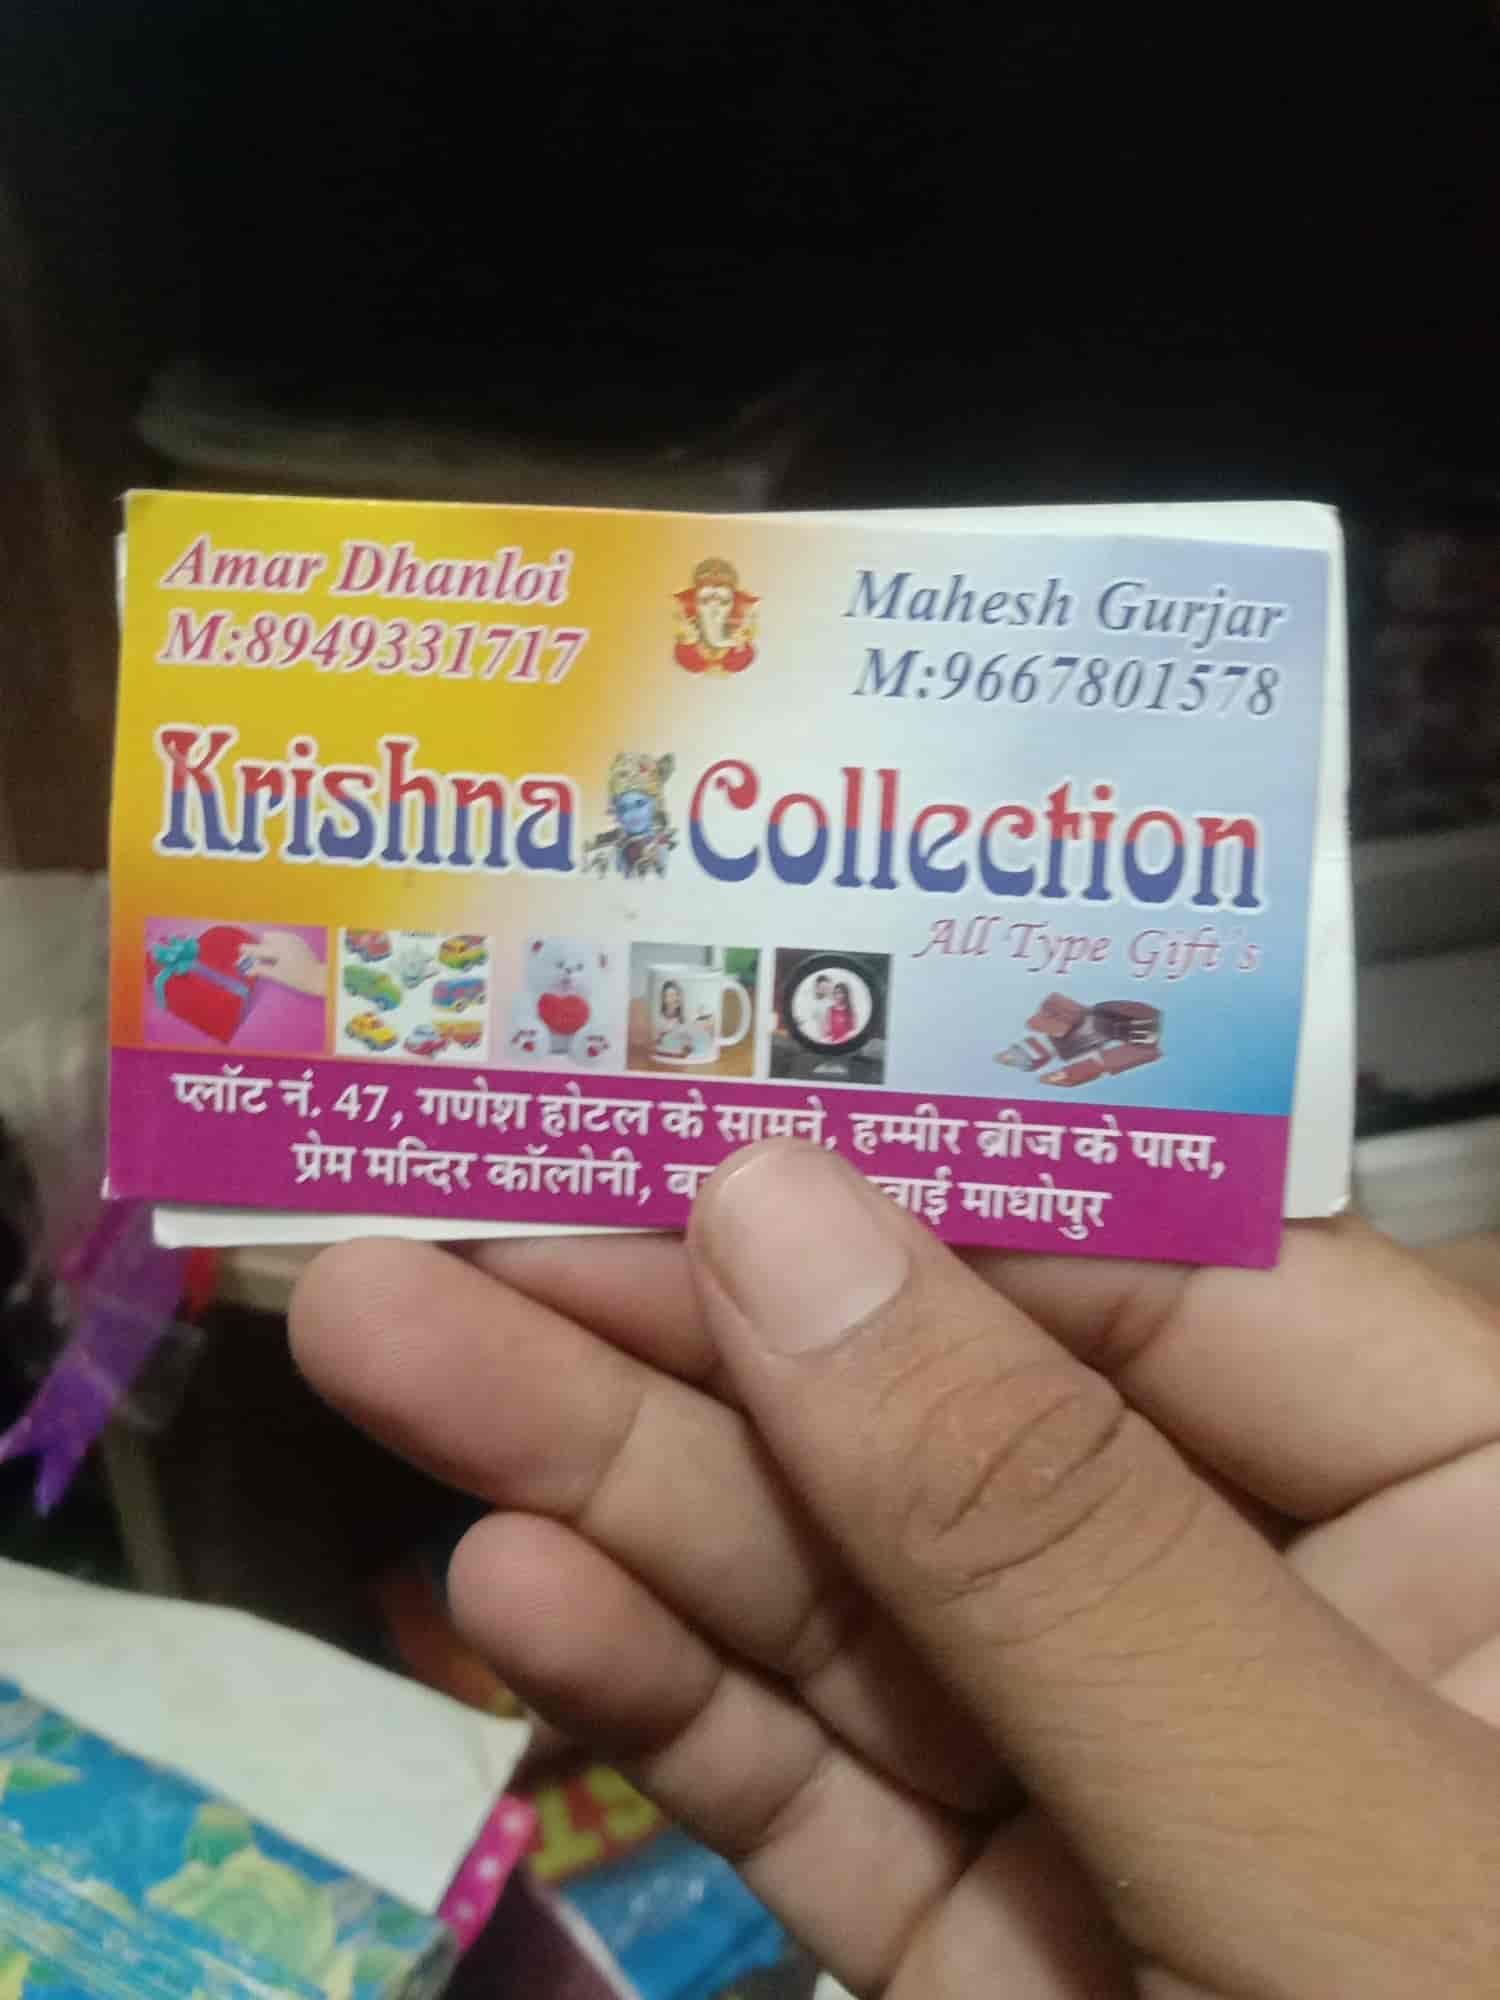 Krishna Gift Collection